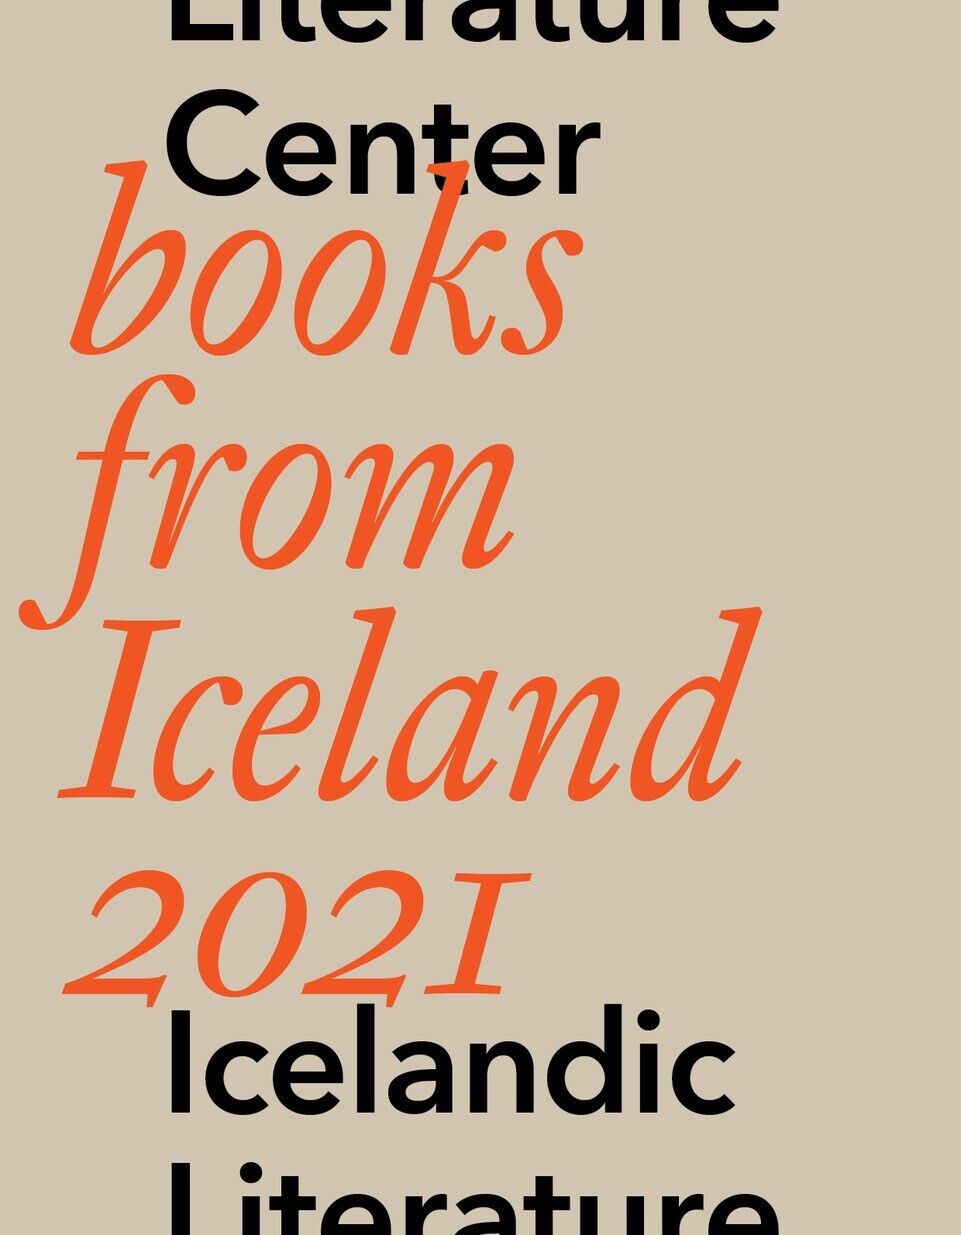 Books from Iceland 2021